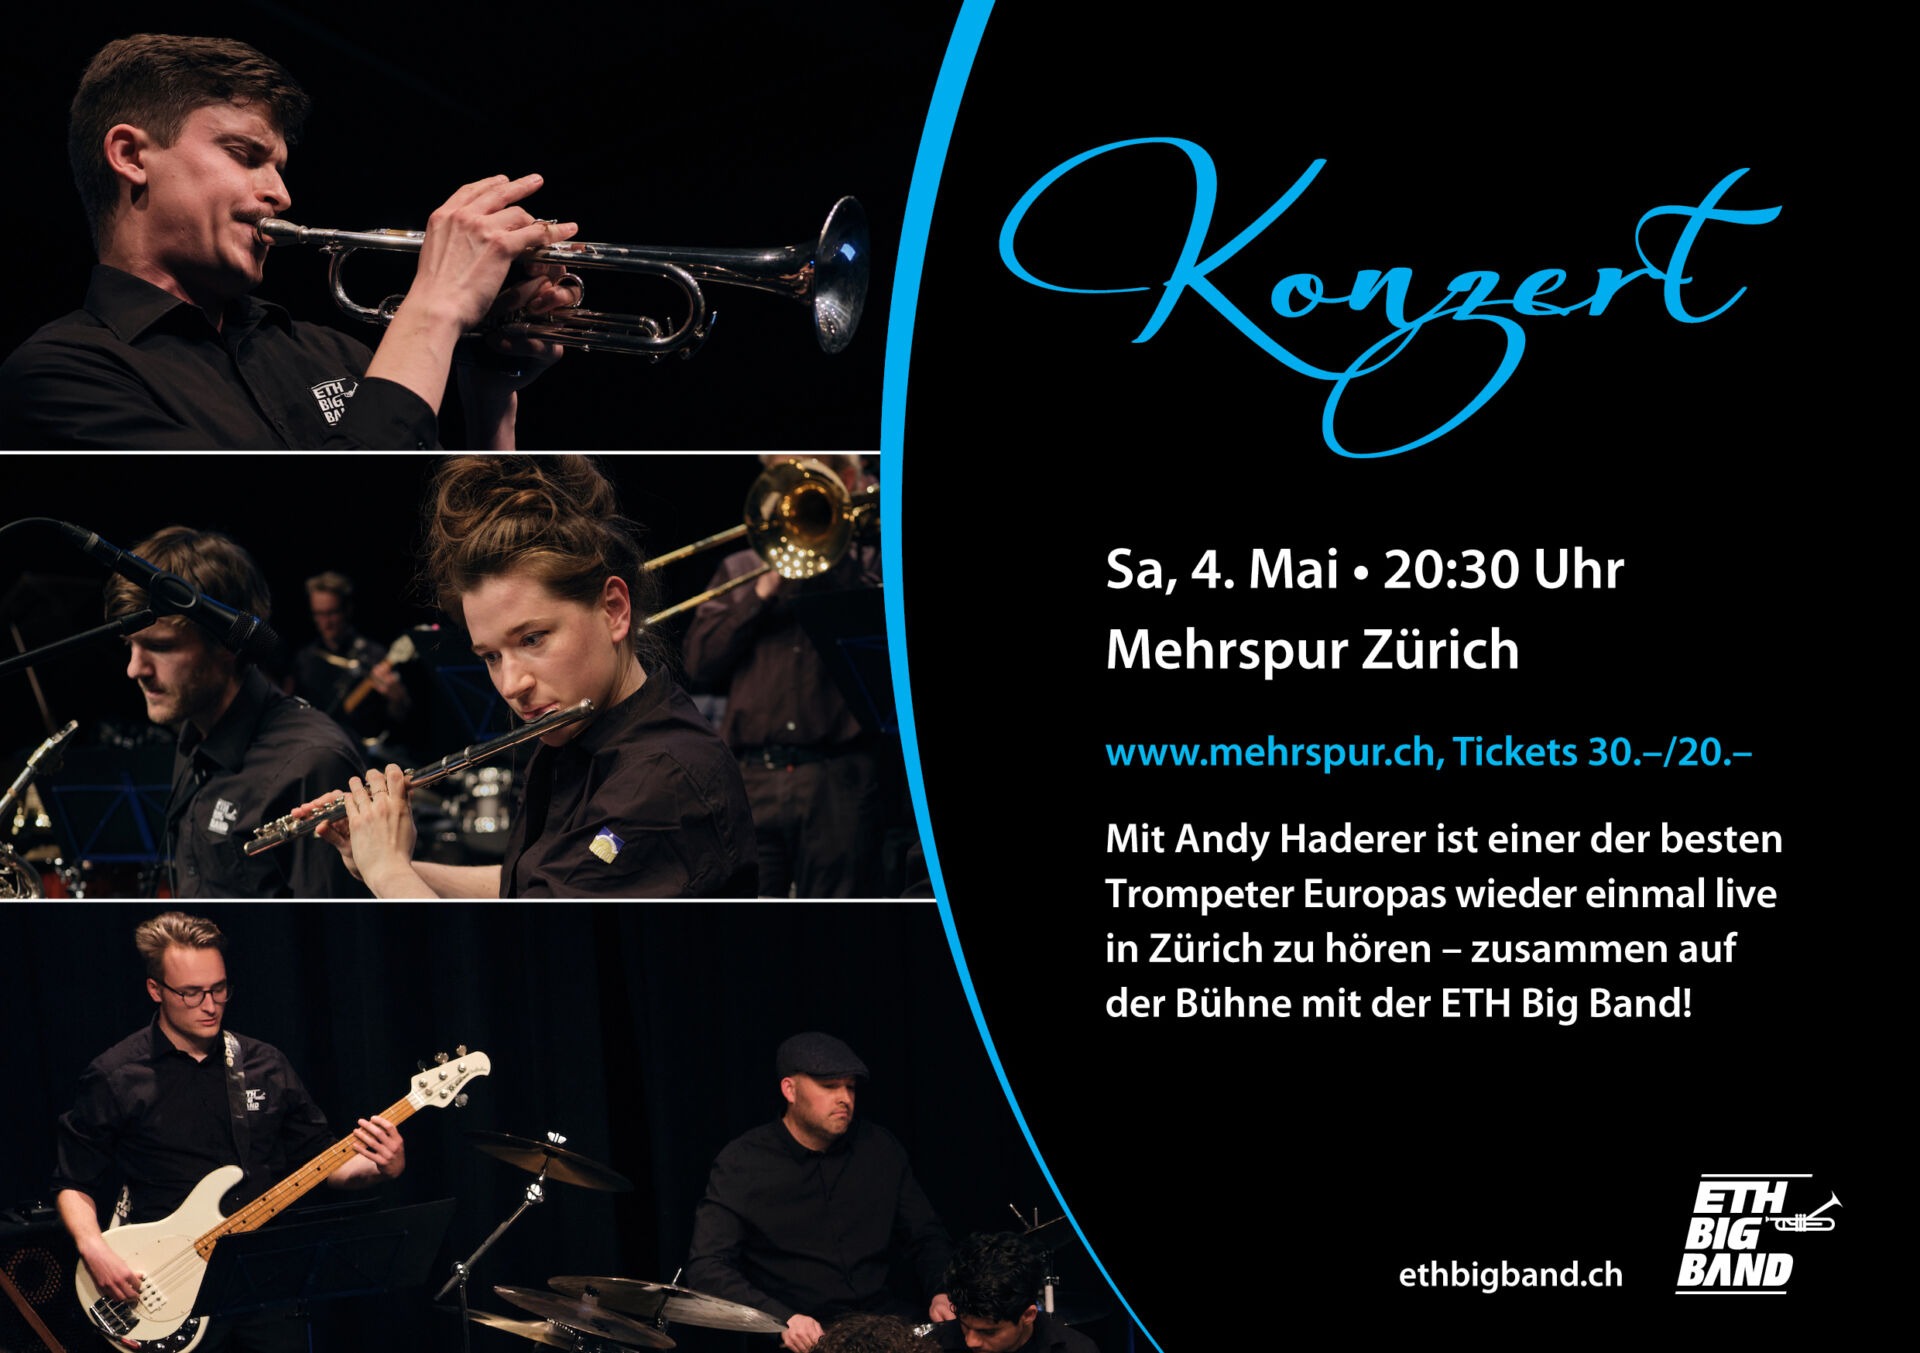 ETH Big Band Zürich feat. Andy Haderer (tp)